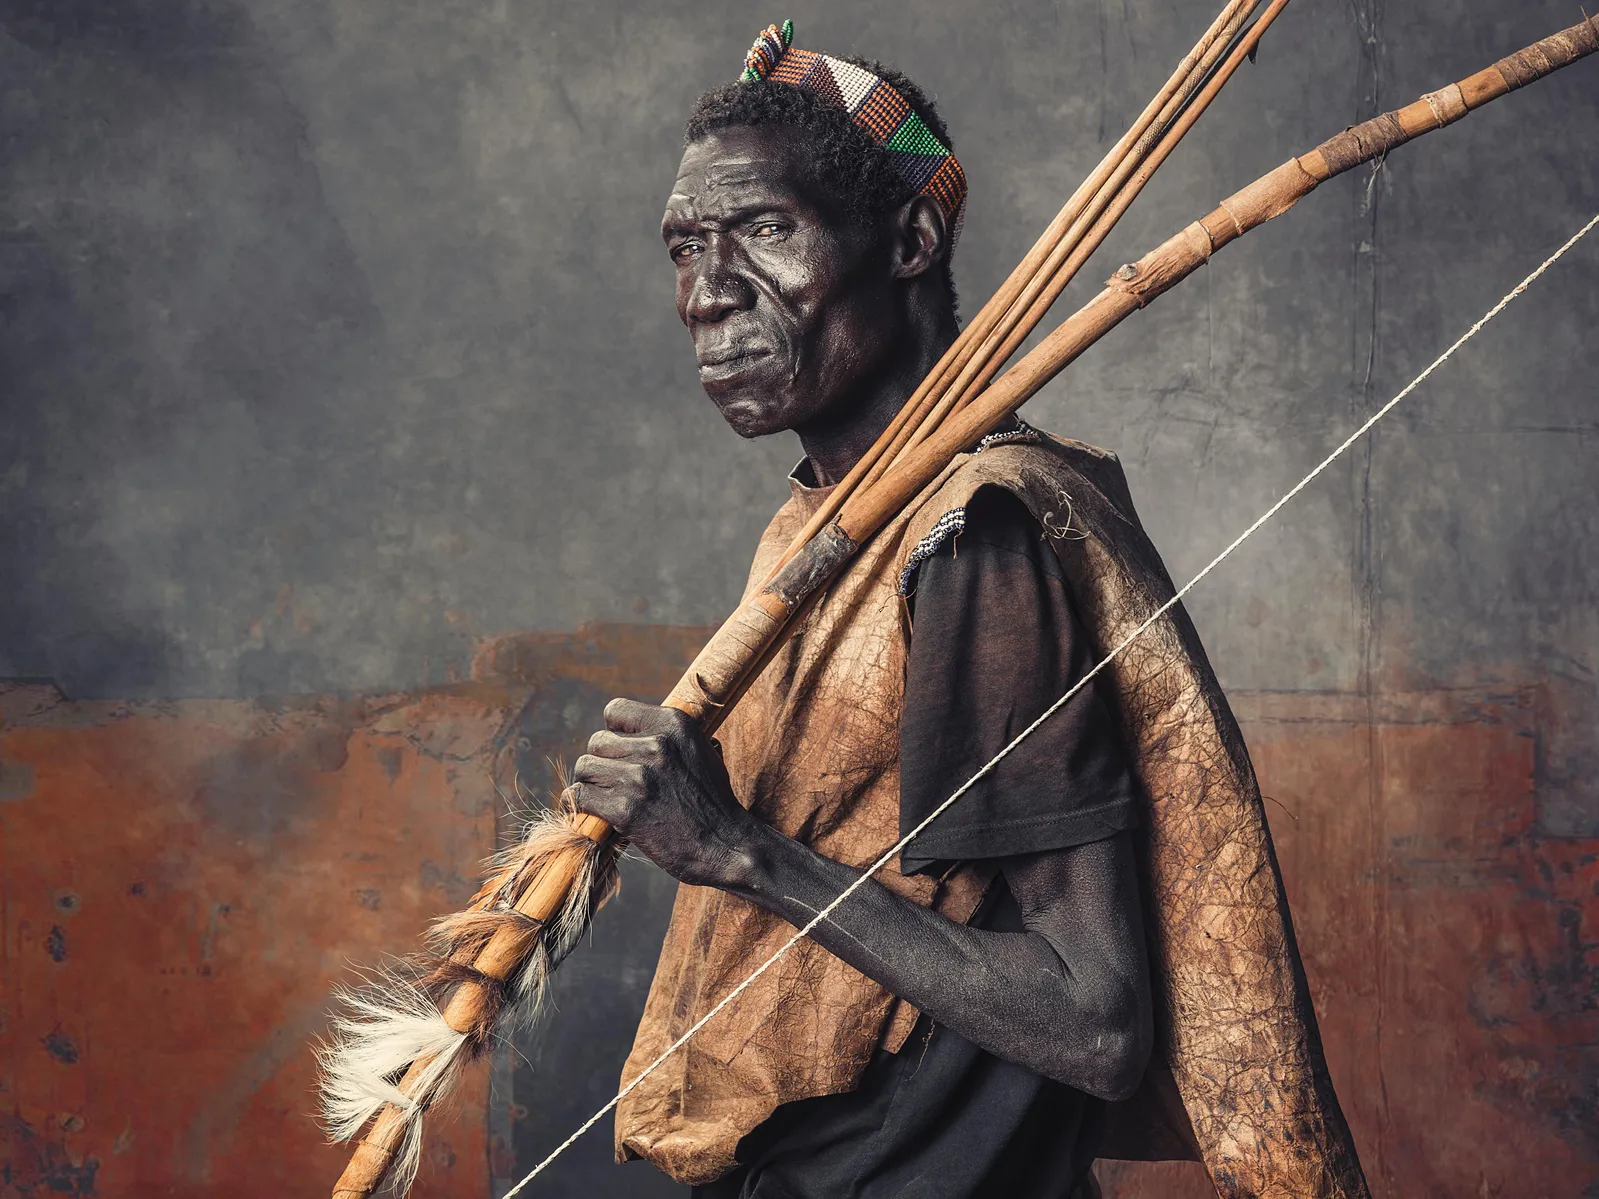 Get Face to Face With the Tribes of Tanzania | Arts & Culture| Smithsonian  Magazine